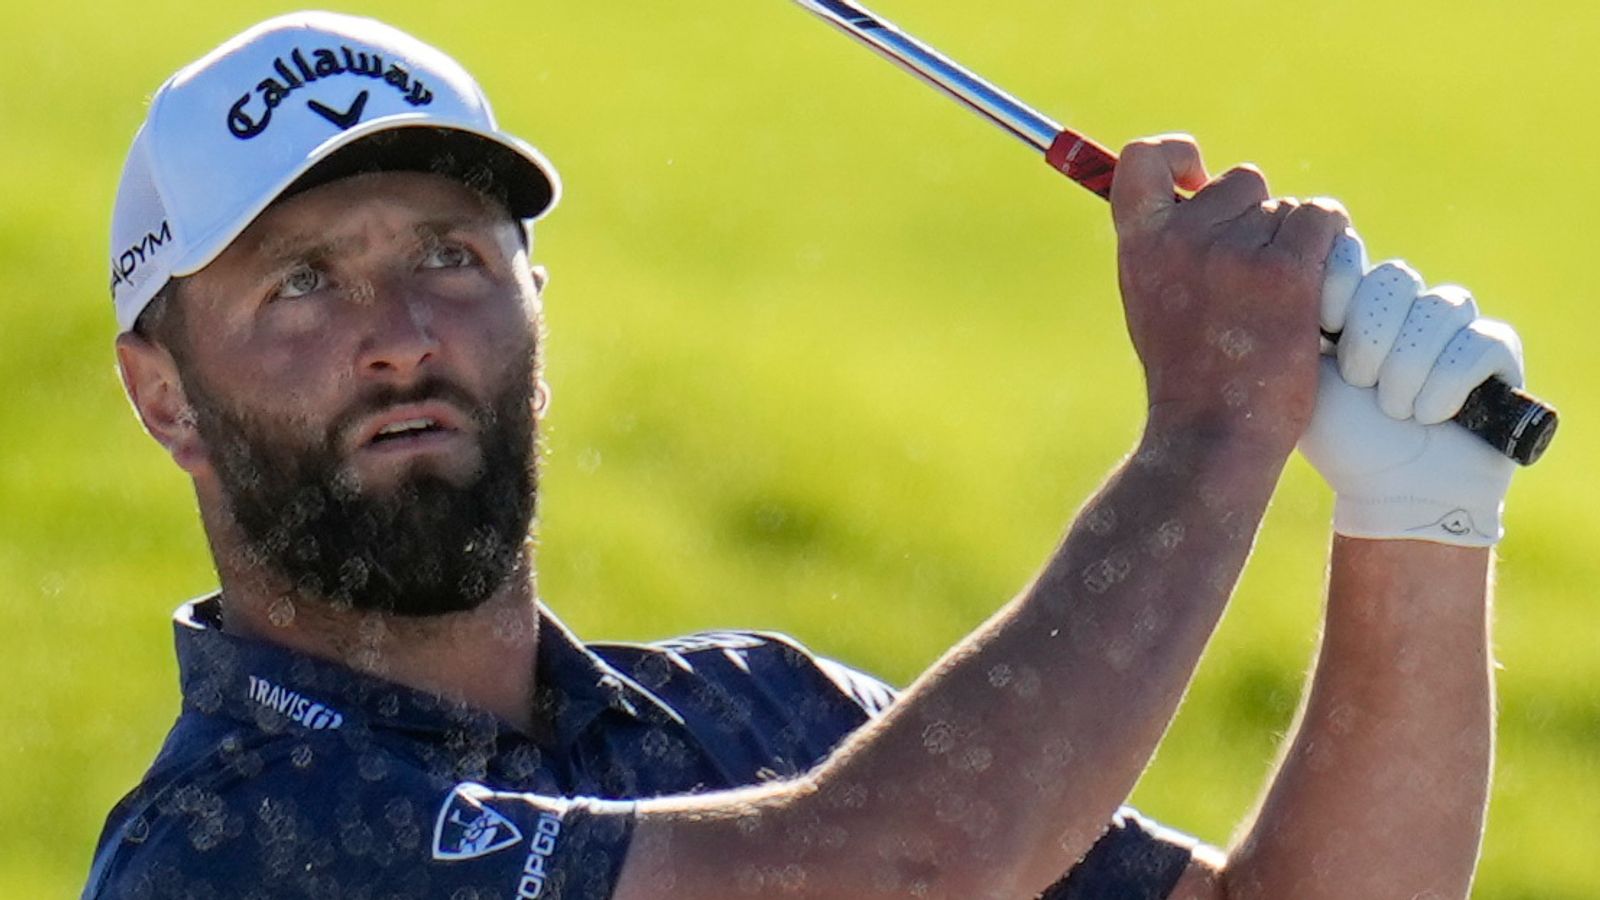 Farmers Insurance Open: Jon Rahm moves two behind Sam Ryder as he chases third consecutive PGA Tour win